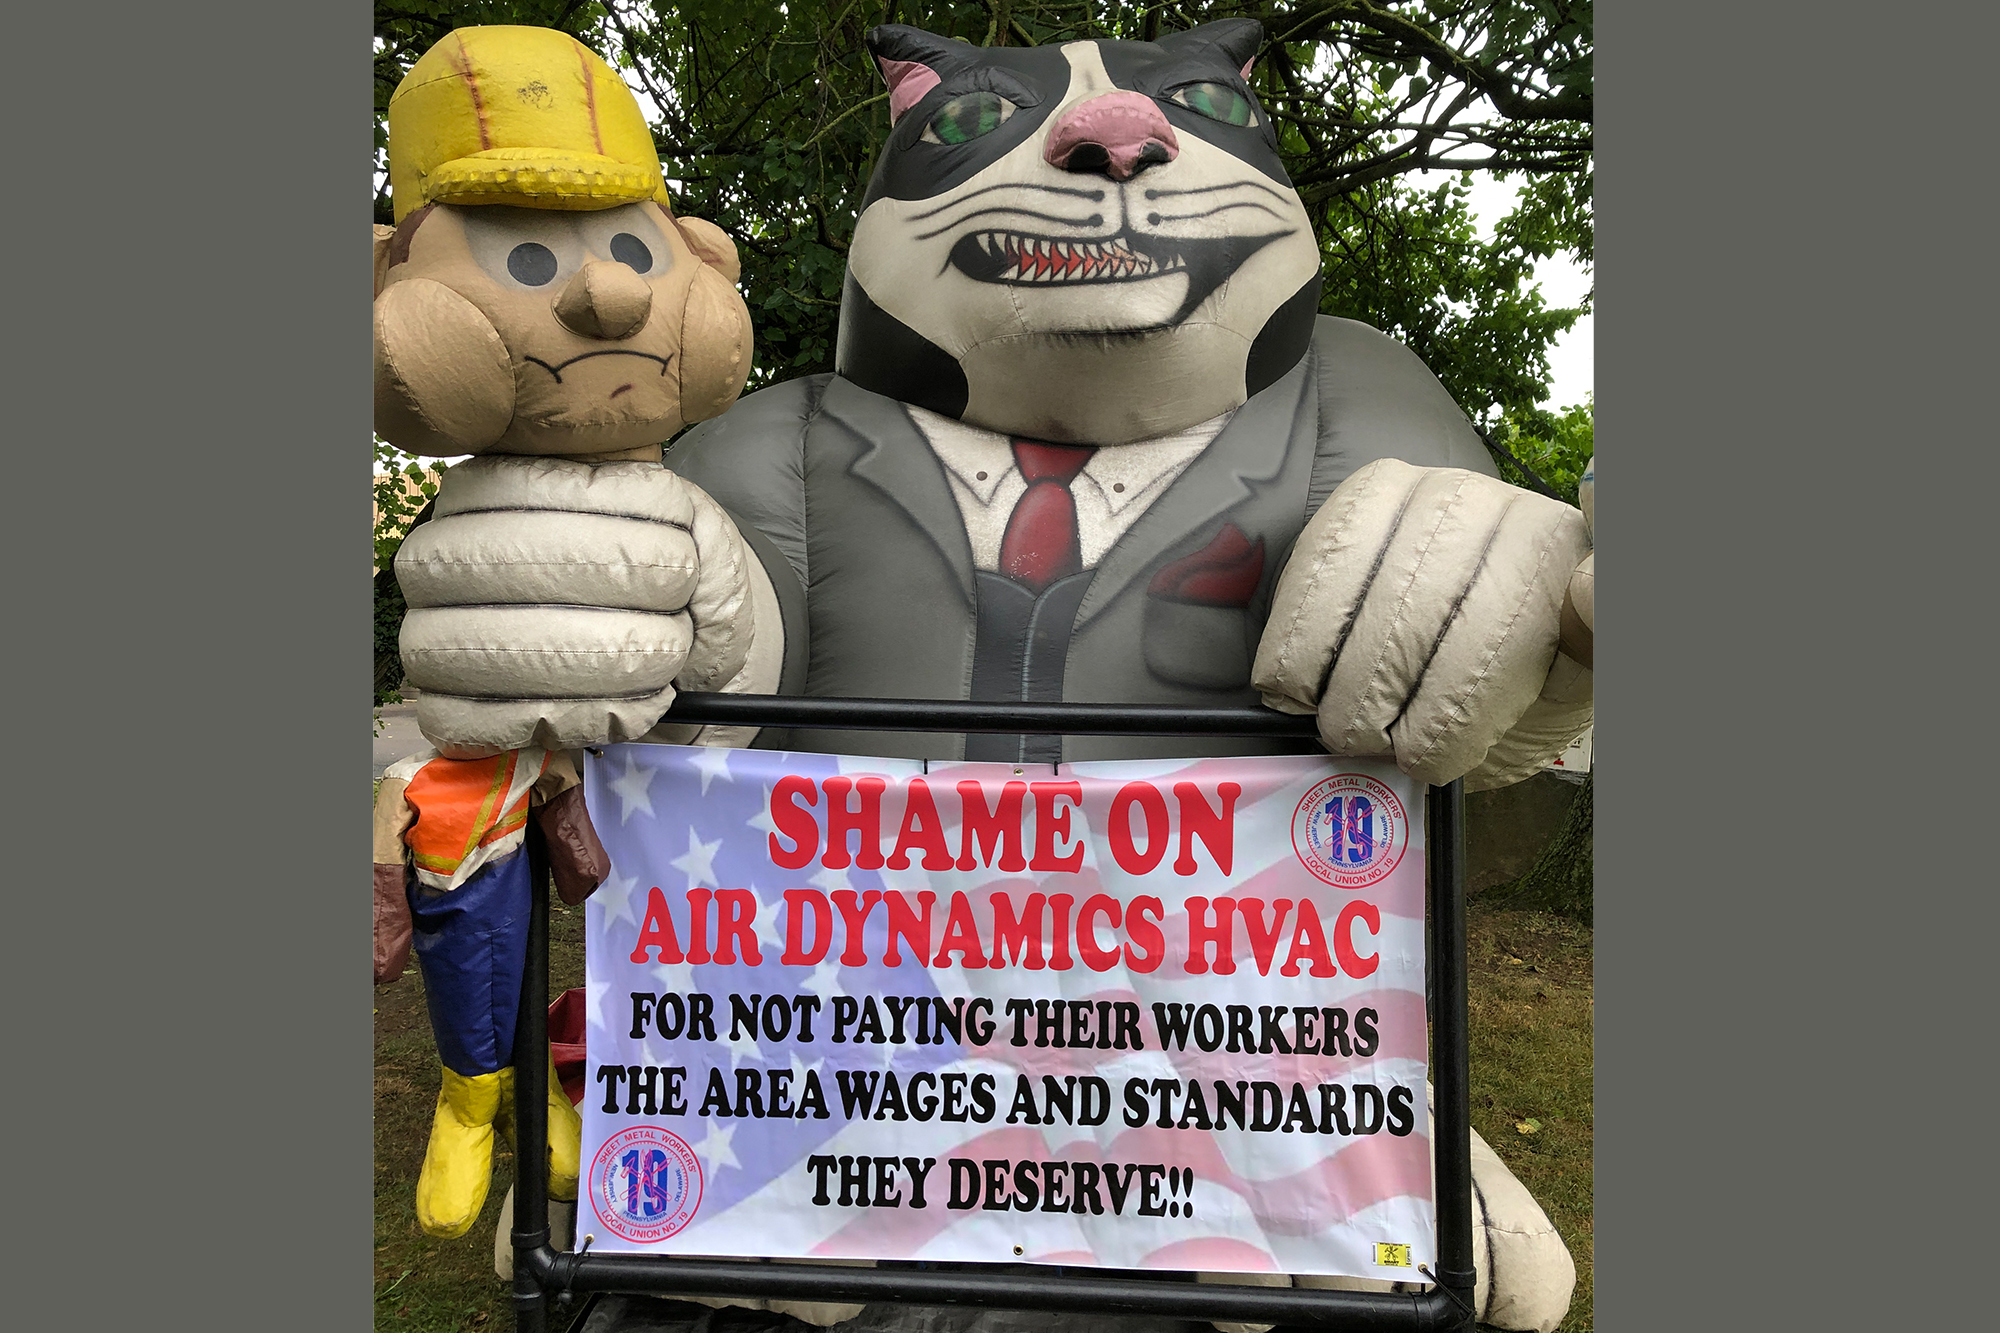 A large blow-up "fat cat" in a suit holds a construction-hatted worker in a stranglehold. The sign reads, "Shame on Air Dynamics HVAC for not paying their workers the area wages and standards they deserve!!"